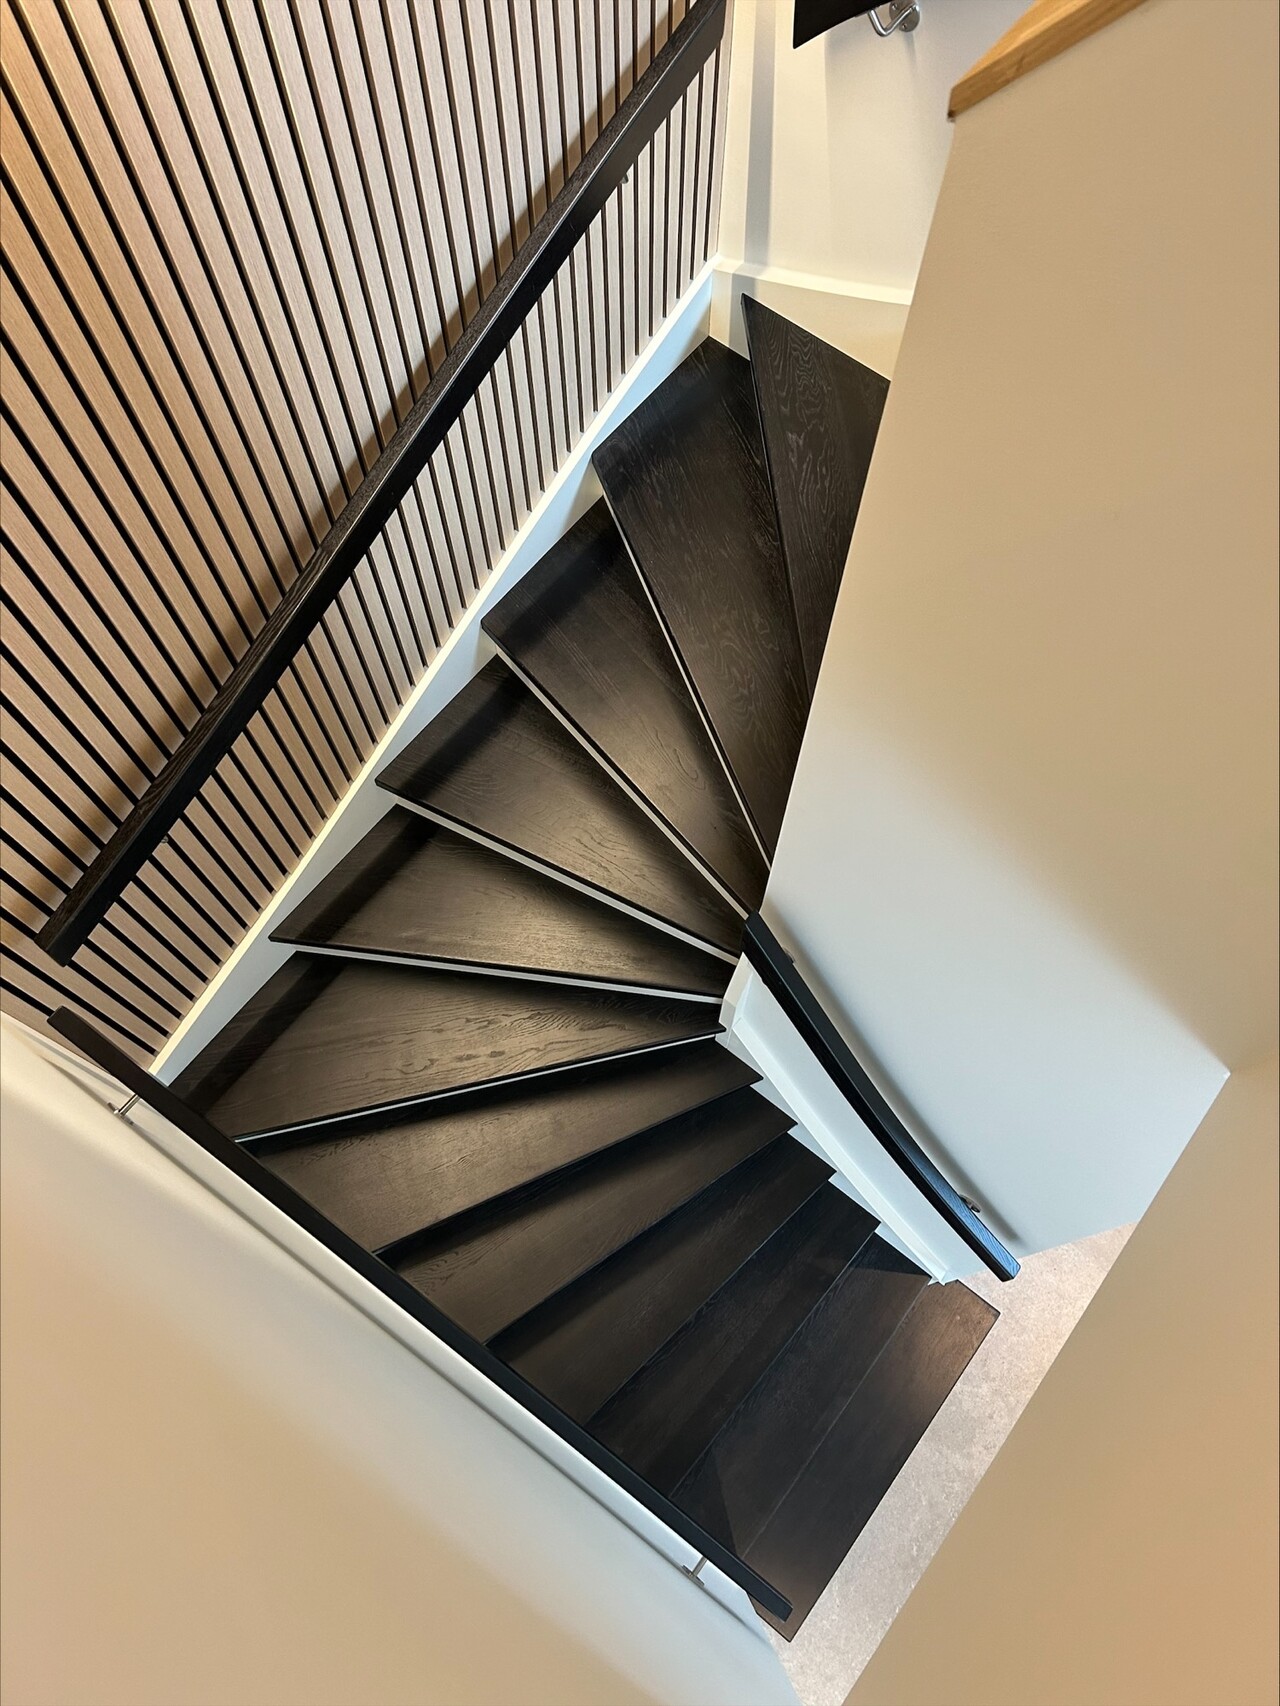 U-shaped staircase made of oak stained black